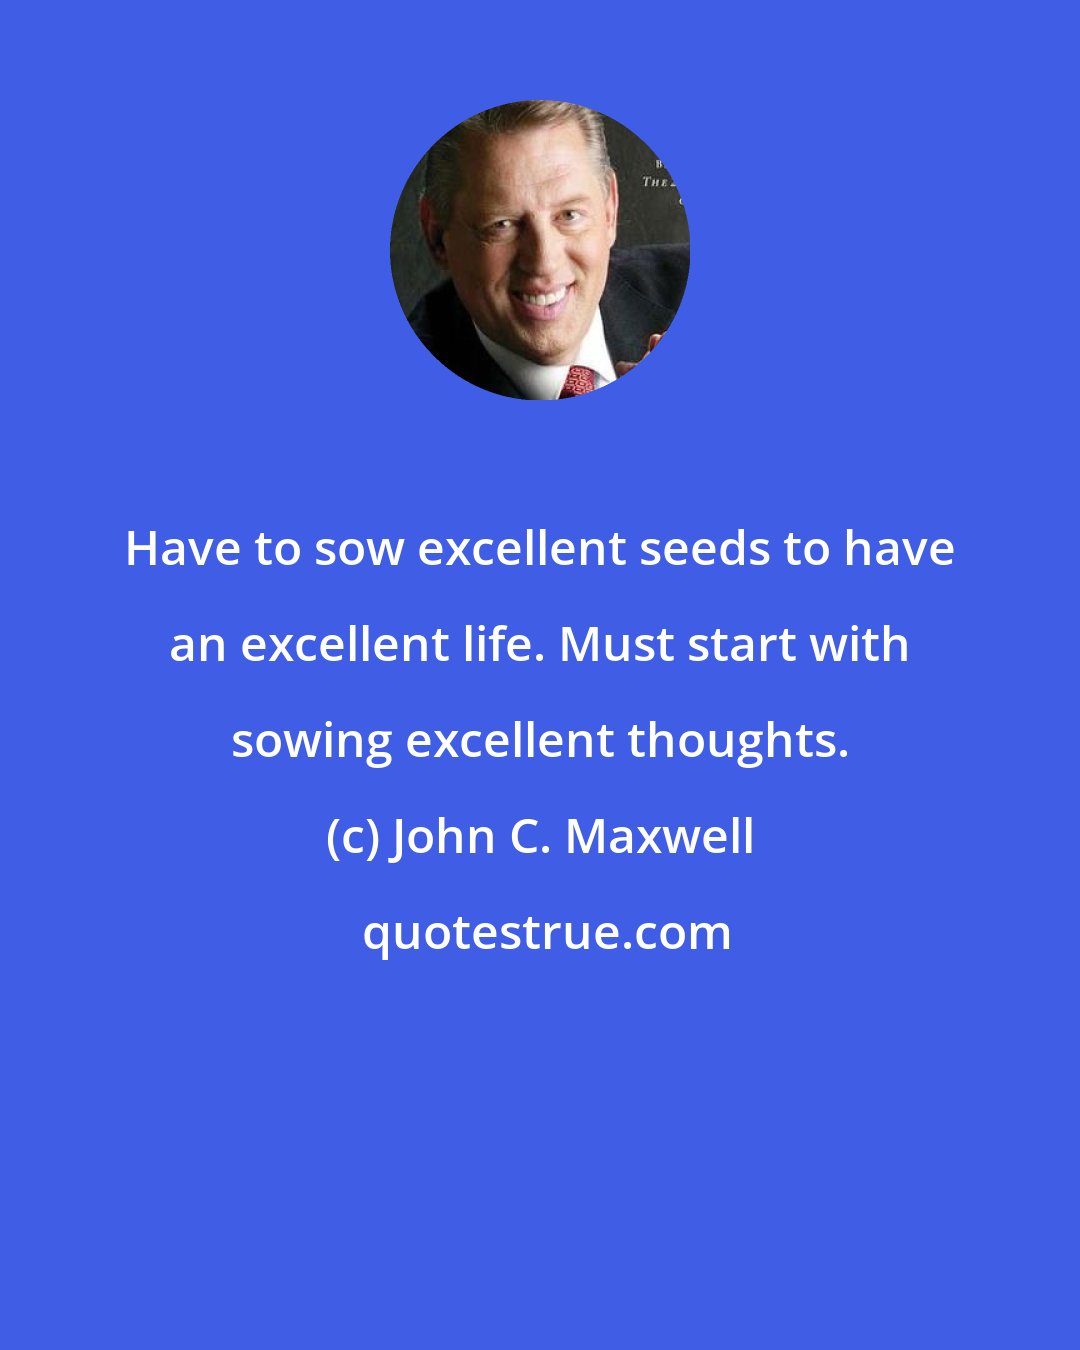 John C. Maxwell: Have to sow excellent seeds to have an excellent life. Must start with sowing excellent thoughts.